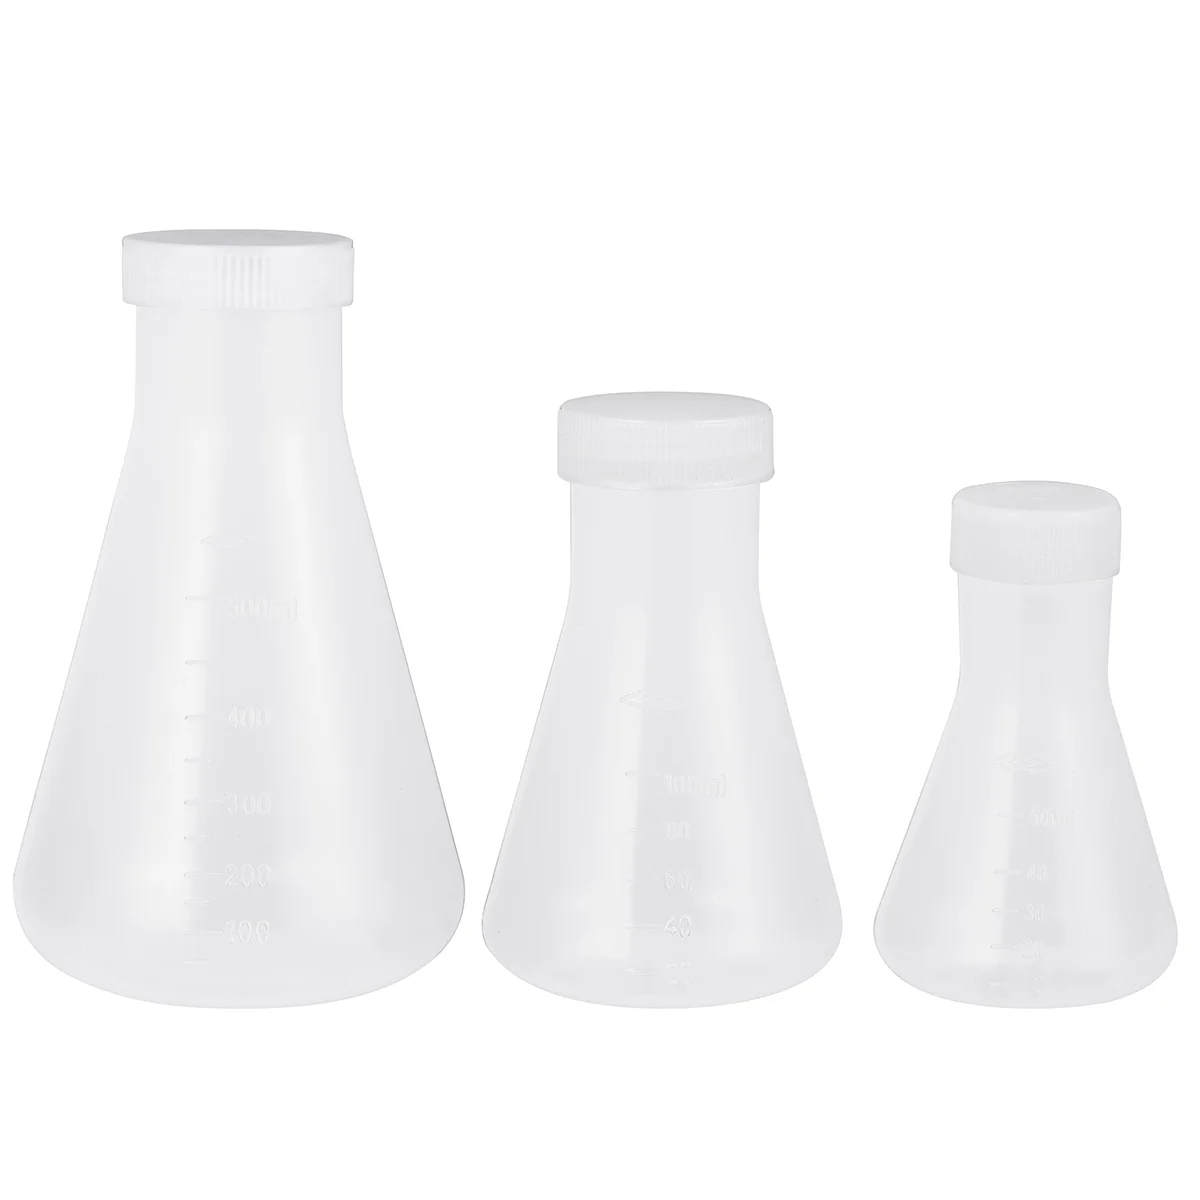 

3Pcs Plastic Flask Conical Flask with Screw for Laboratory Students Experiment Chemistry White (50ml+100ml+500ml)